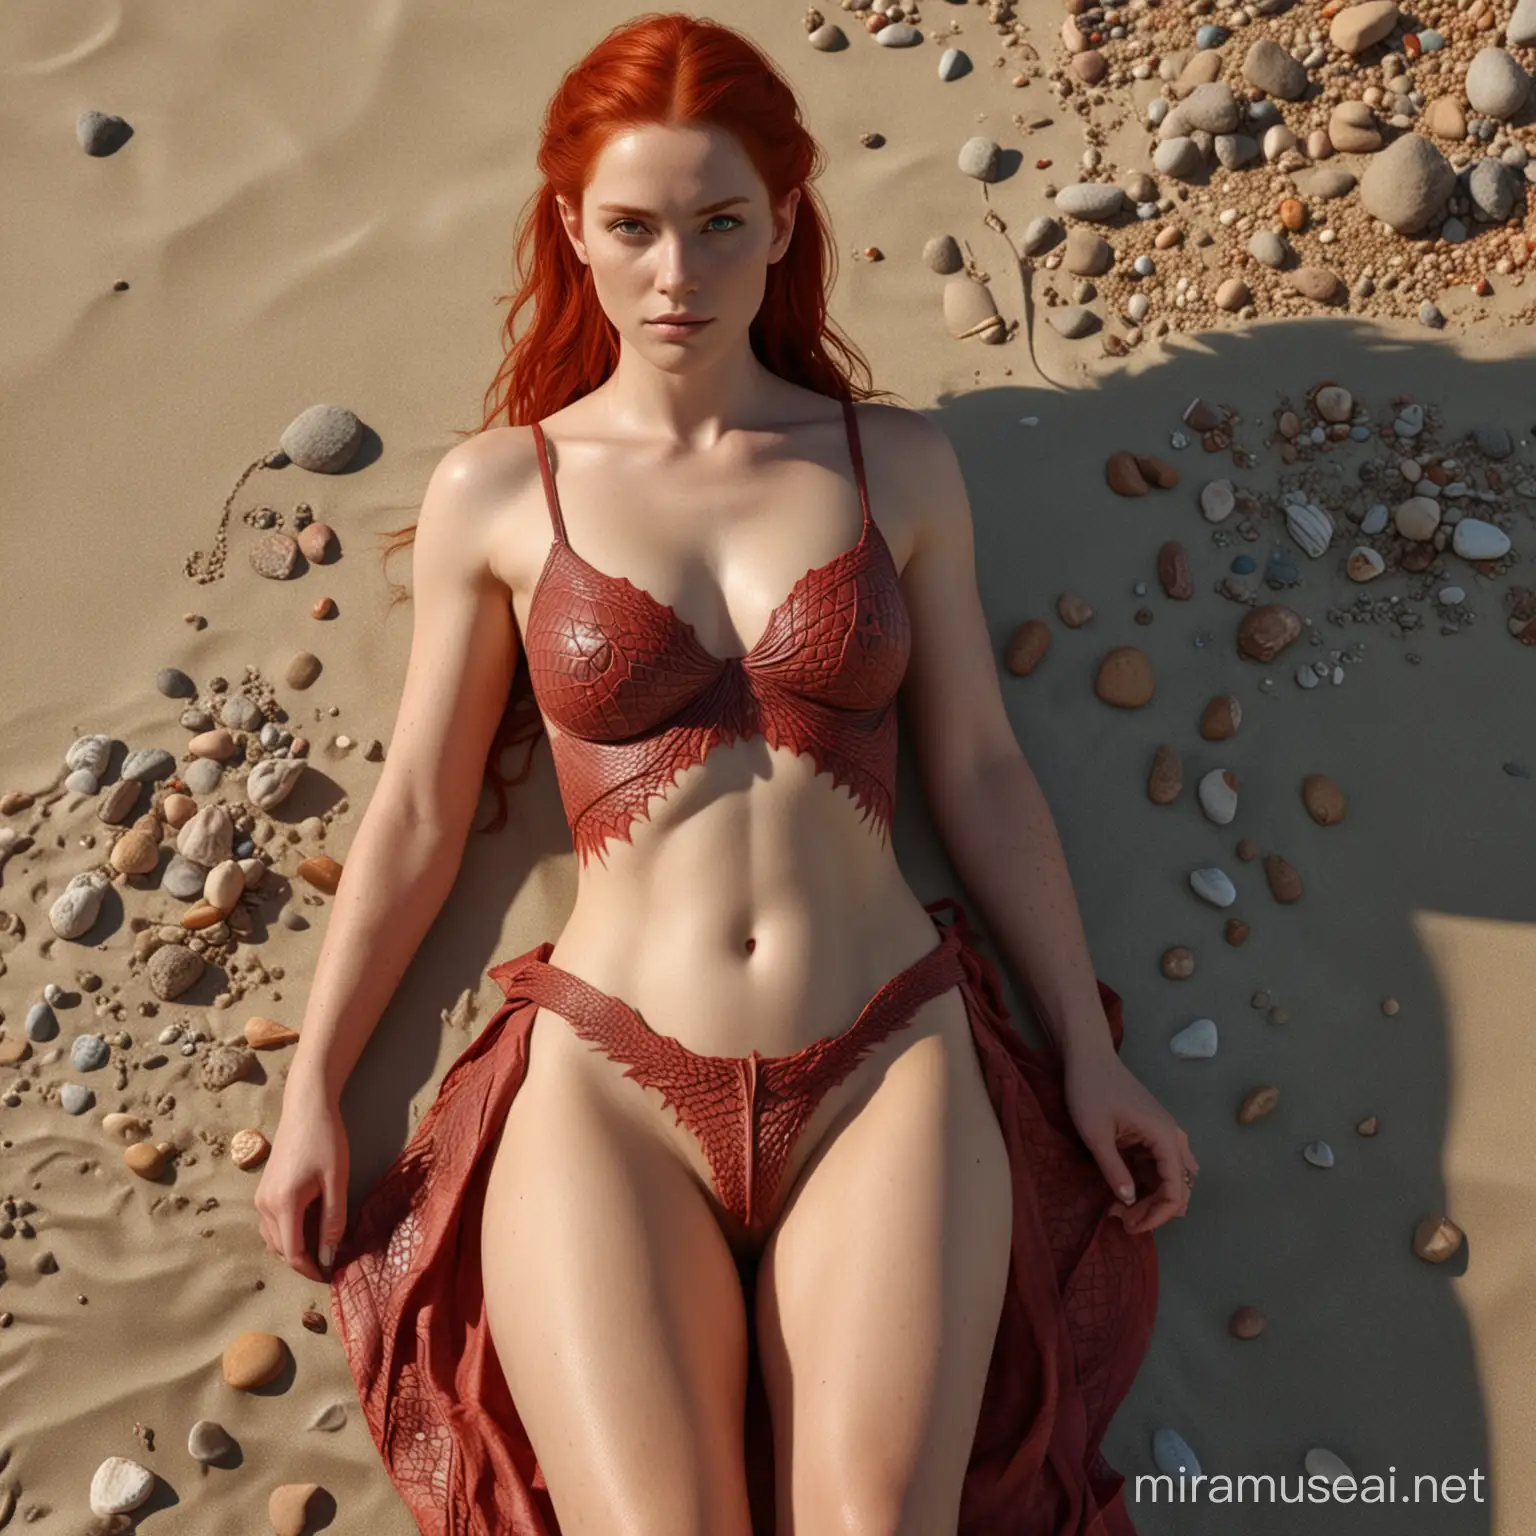 Realistic DragonScale Woman Relaxing at Beach